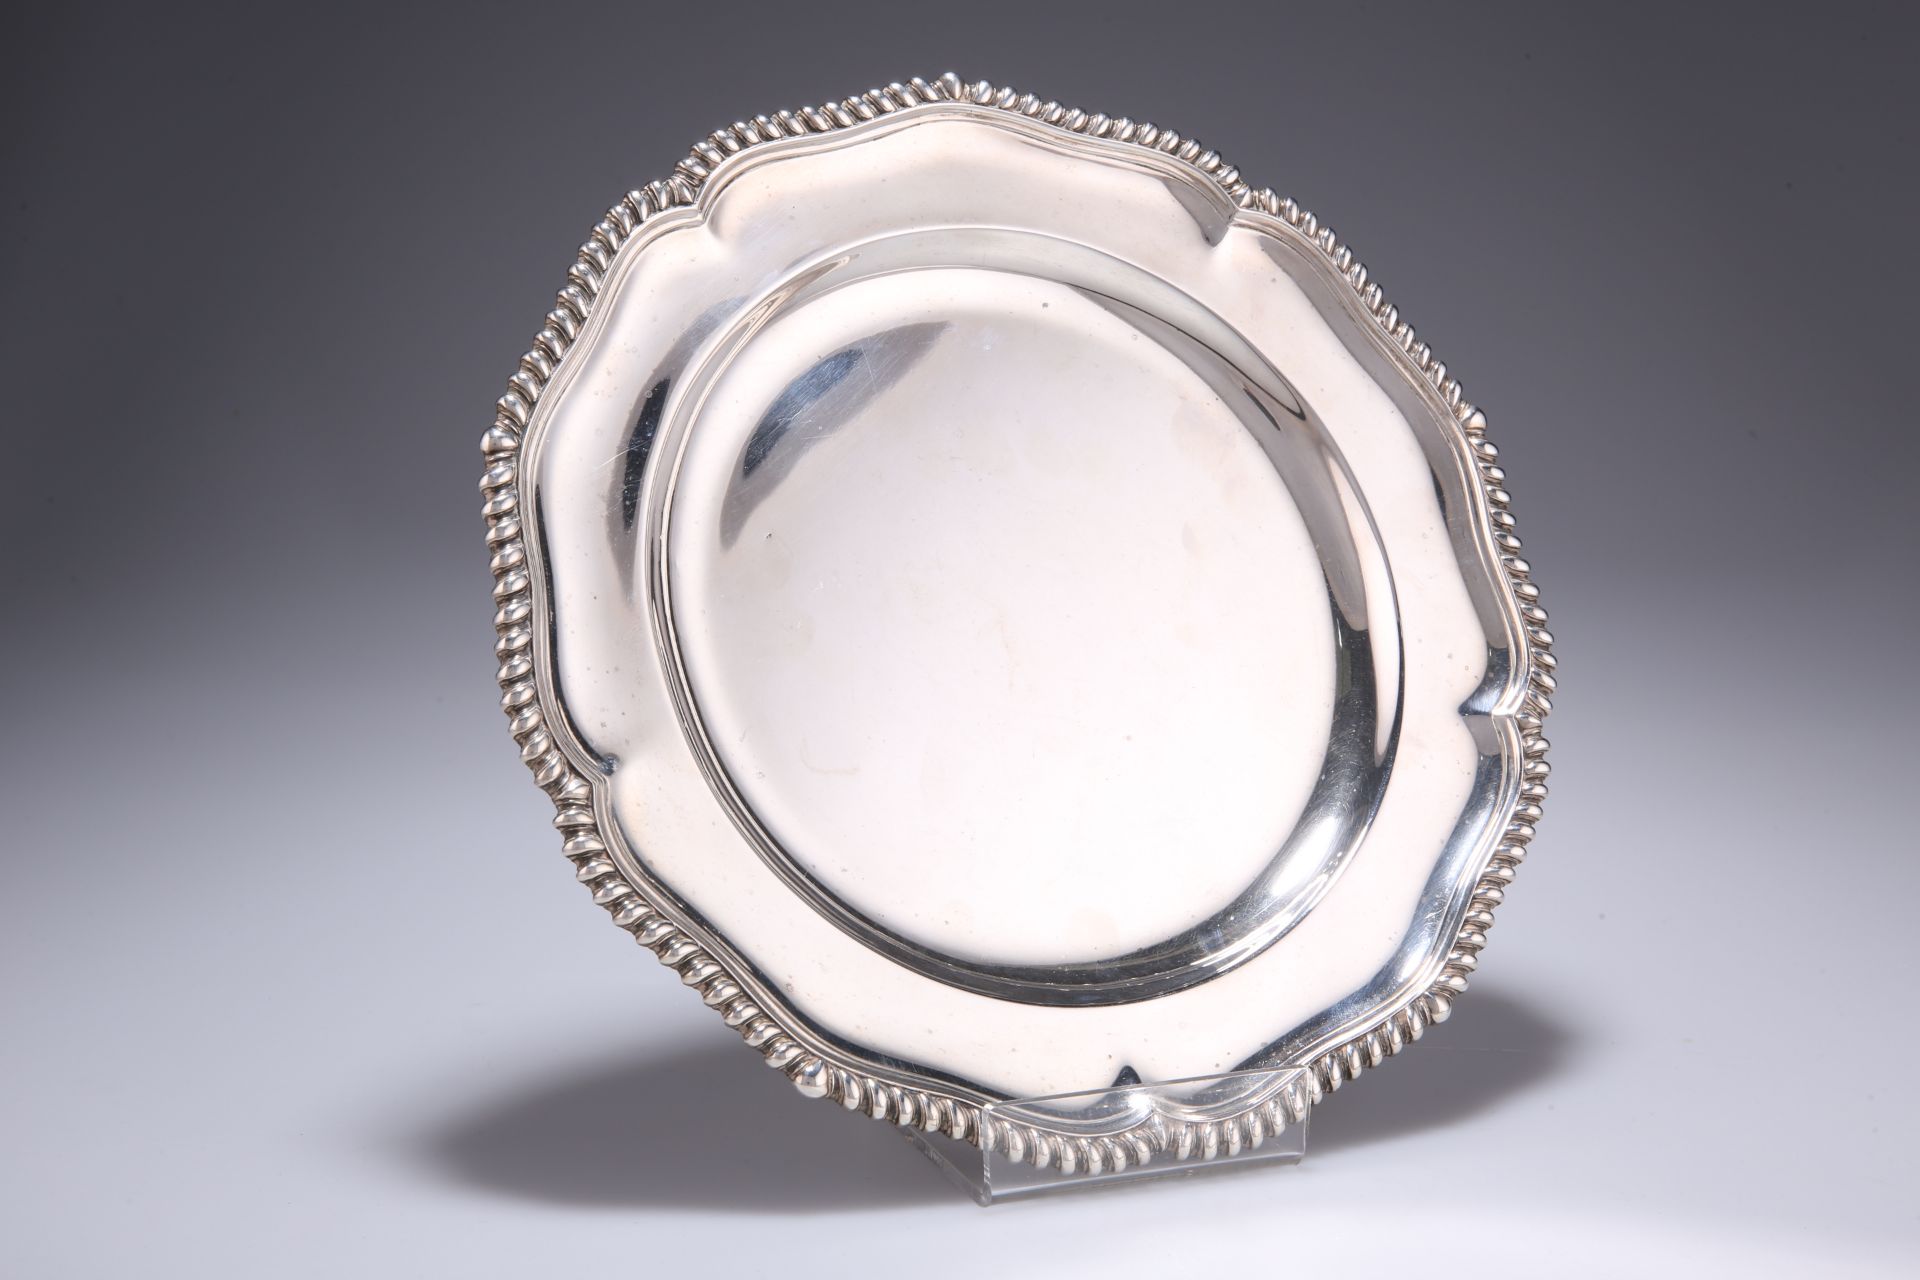 A VICTORIAN SILVER DINNER PLATE, by FB Thomas & Co, London 1878, with gadrooned edge, underside